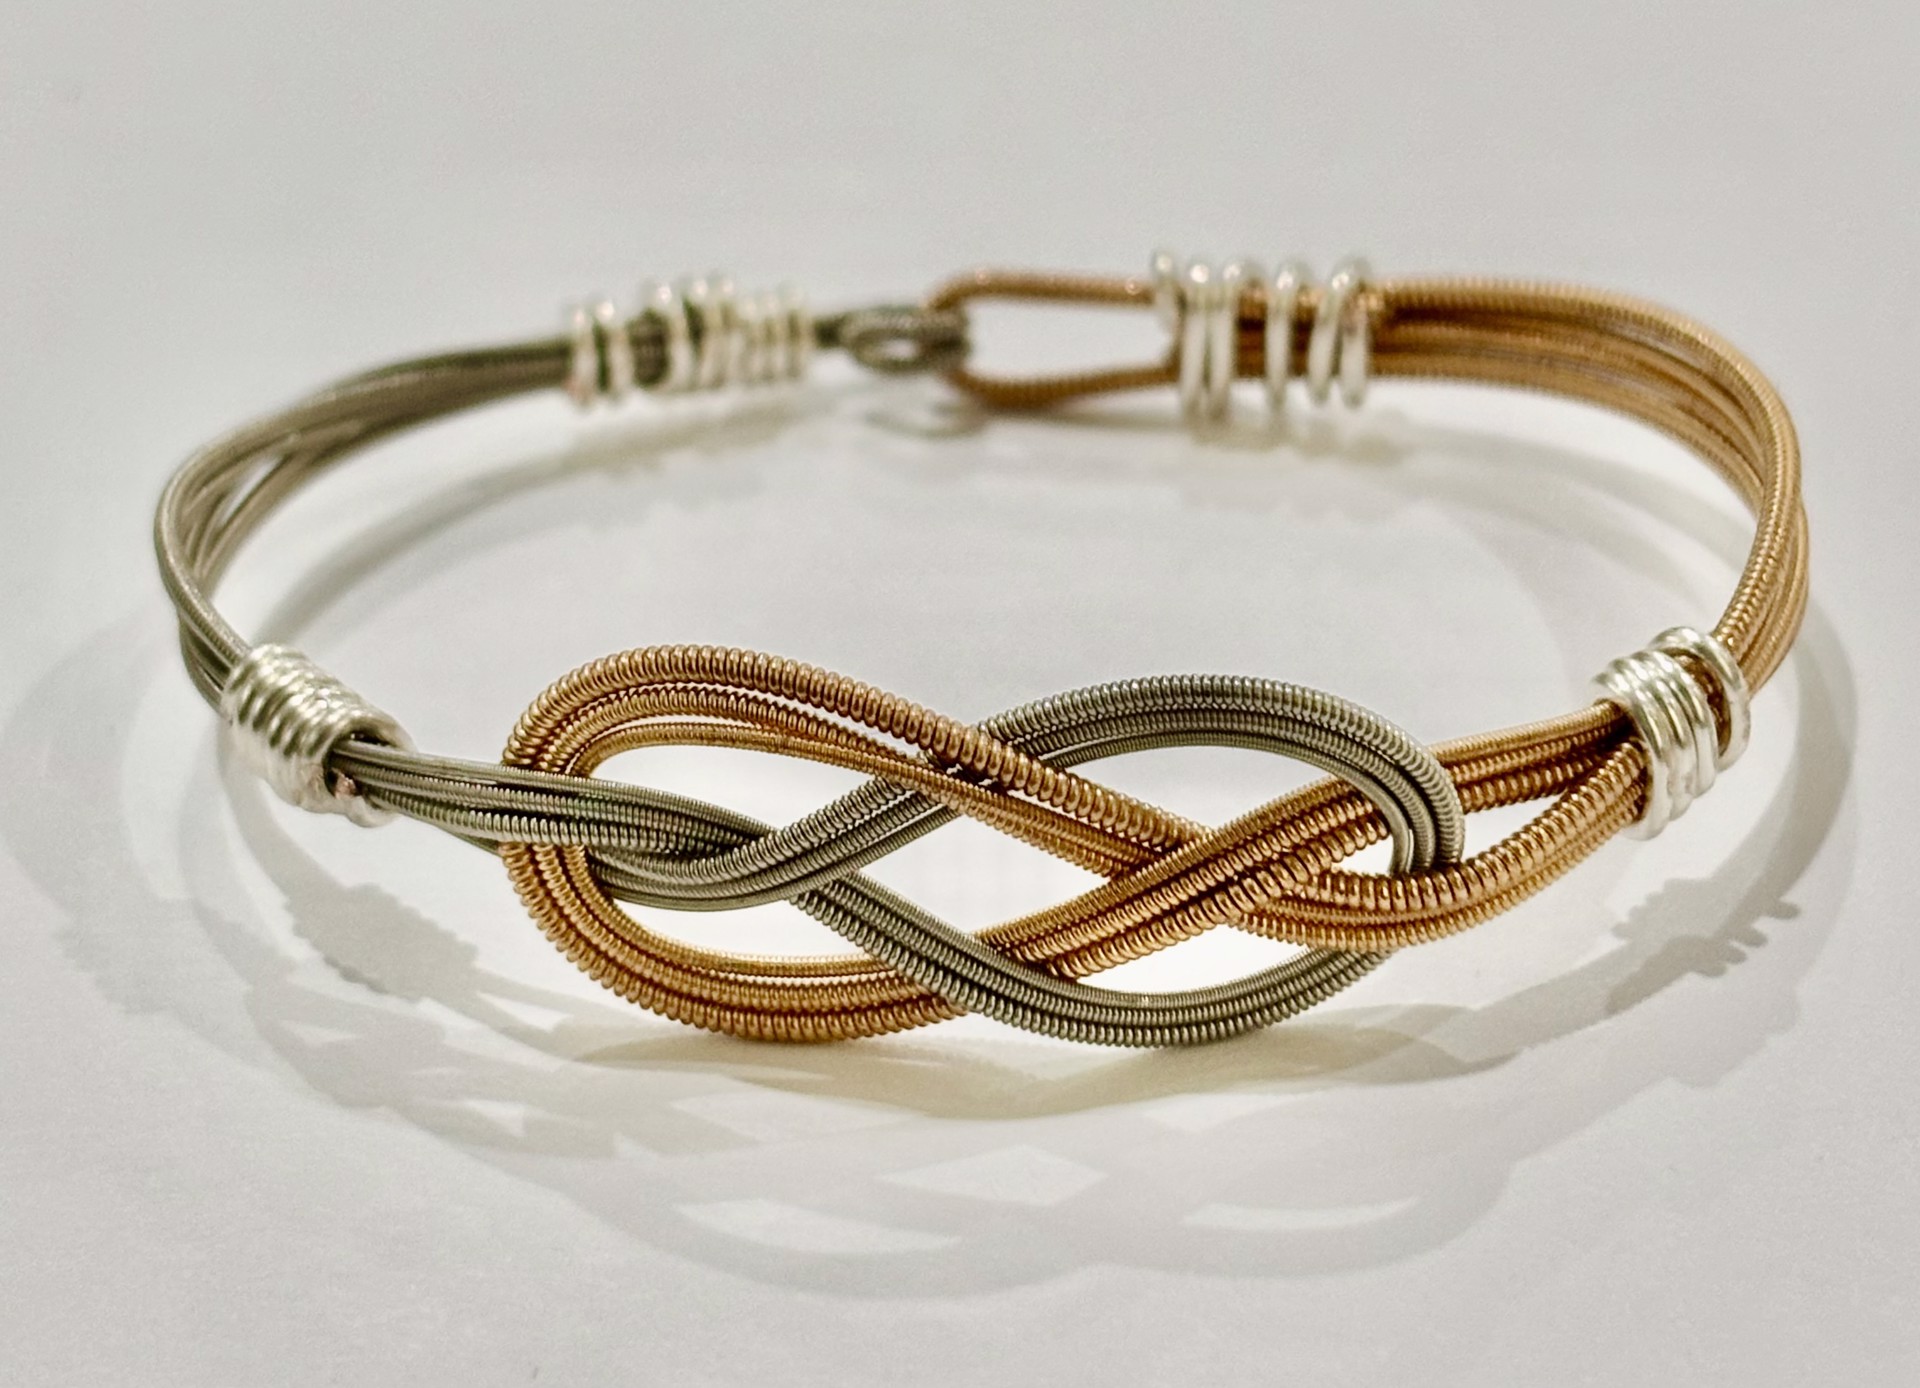 Silver and Rose Guitar String Infinity Bracelet by String Thing Designs